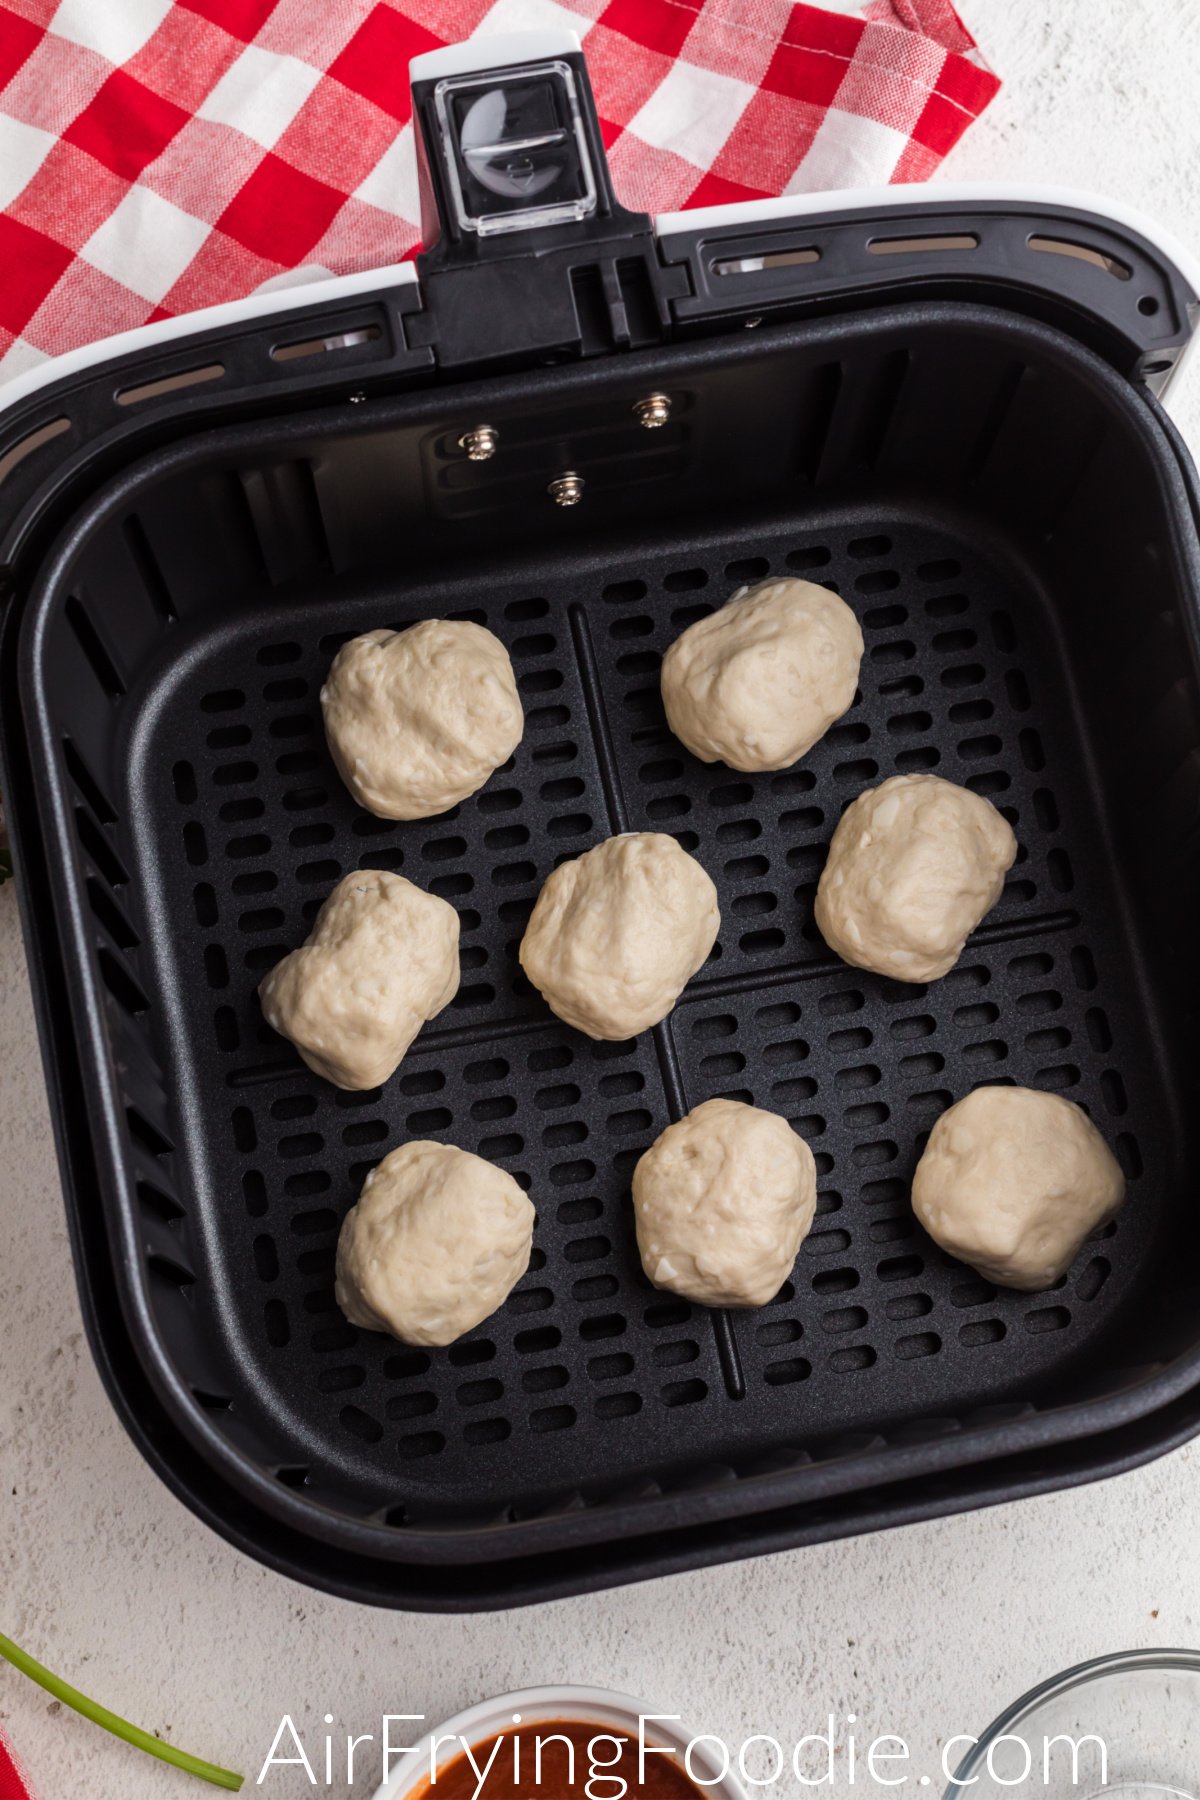 Mozzarella balls in a single layer in the basket of the air fryer.